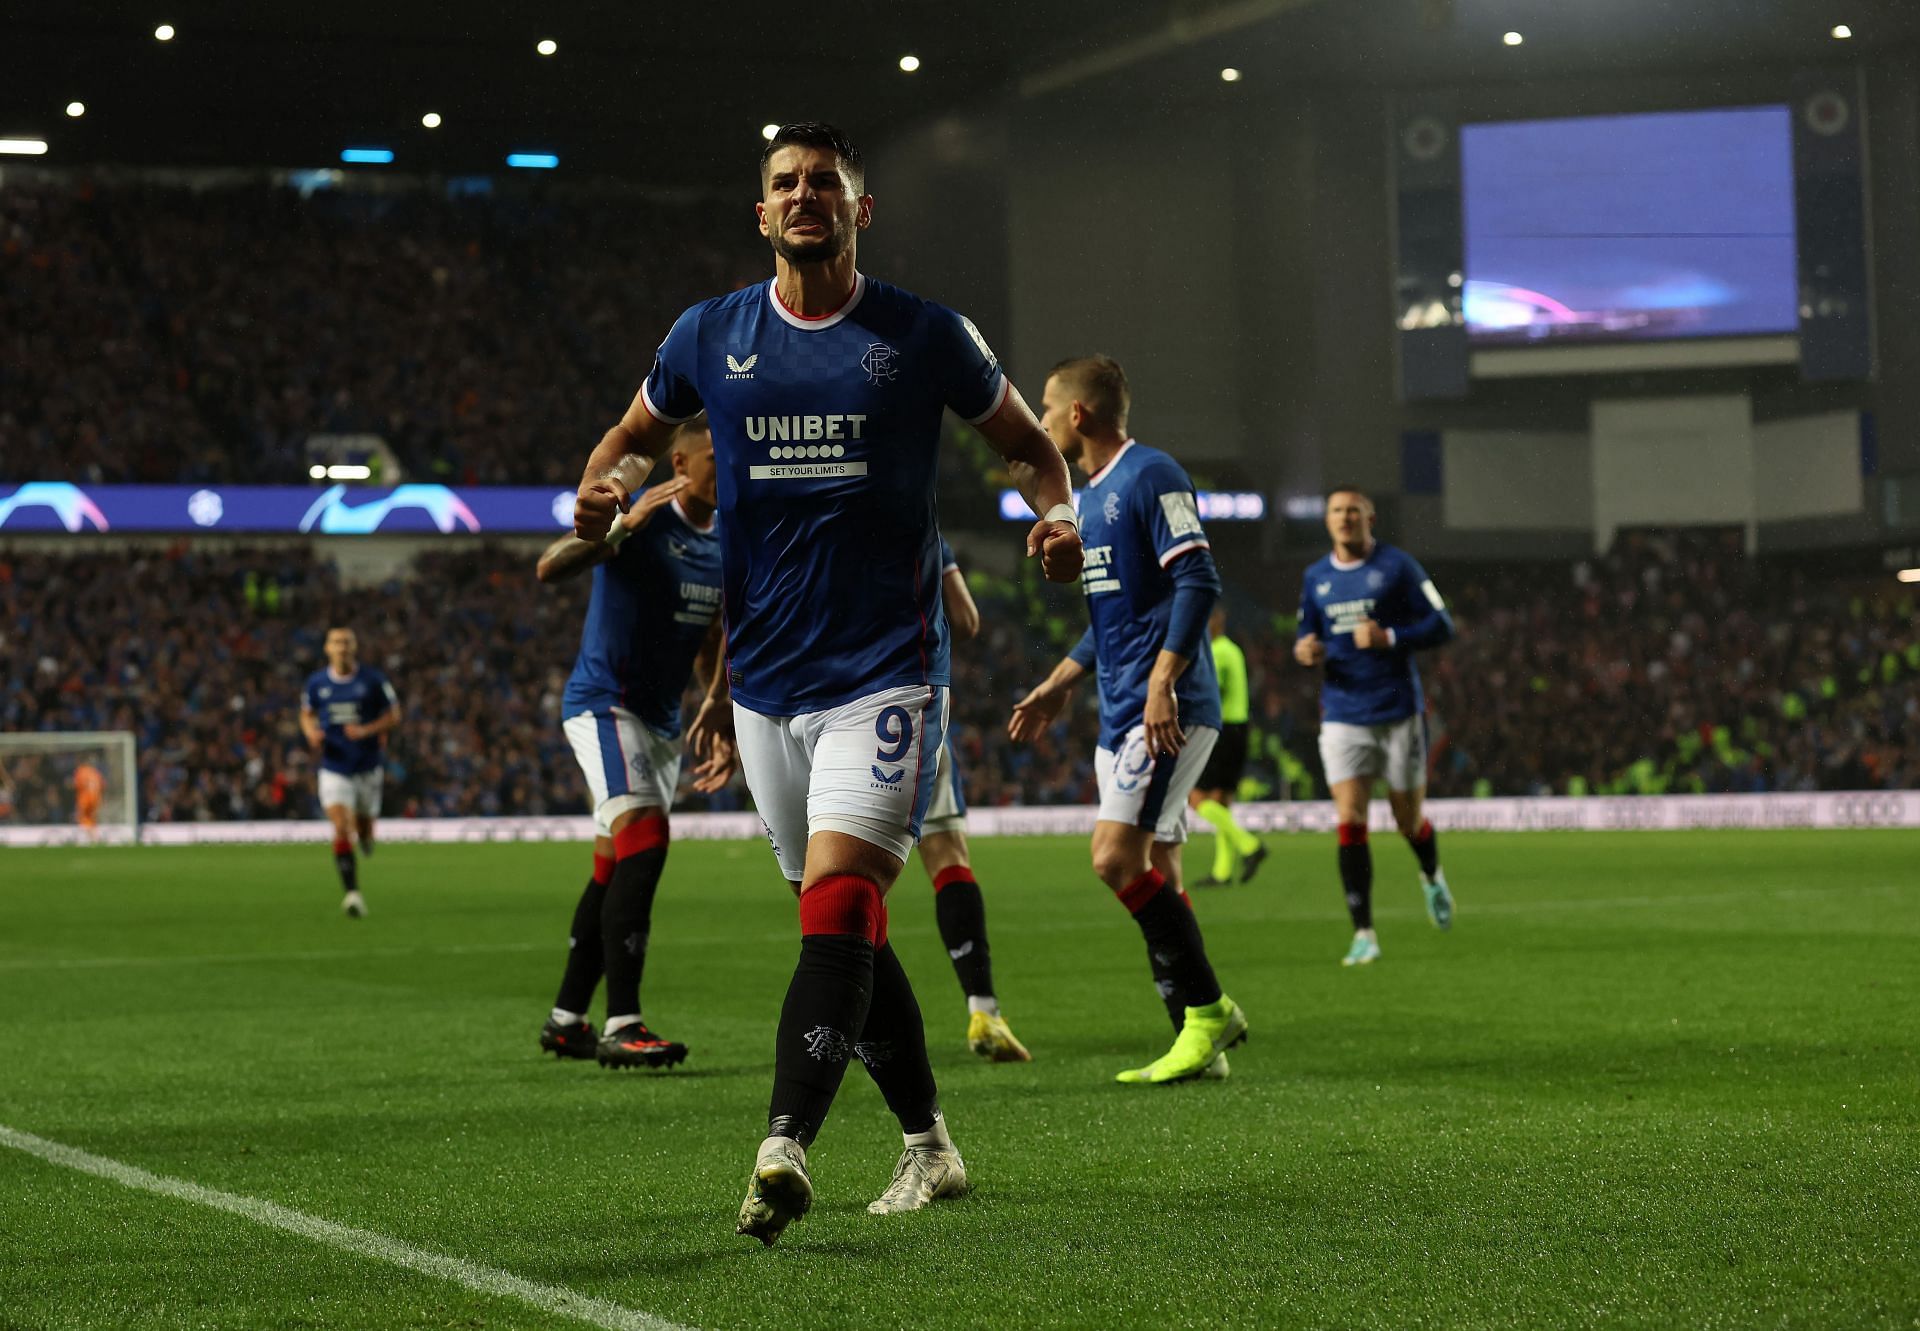 Glasgow Rangers v PSV Eindhoven - UEFA Champions League Play-Off First Leg